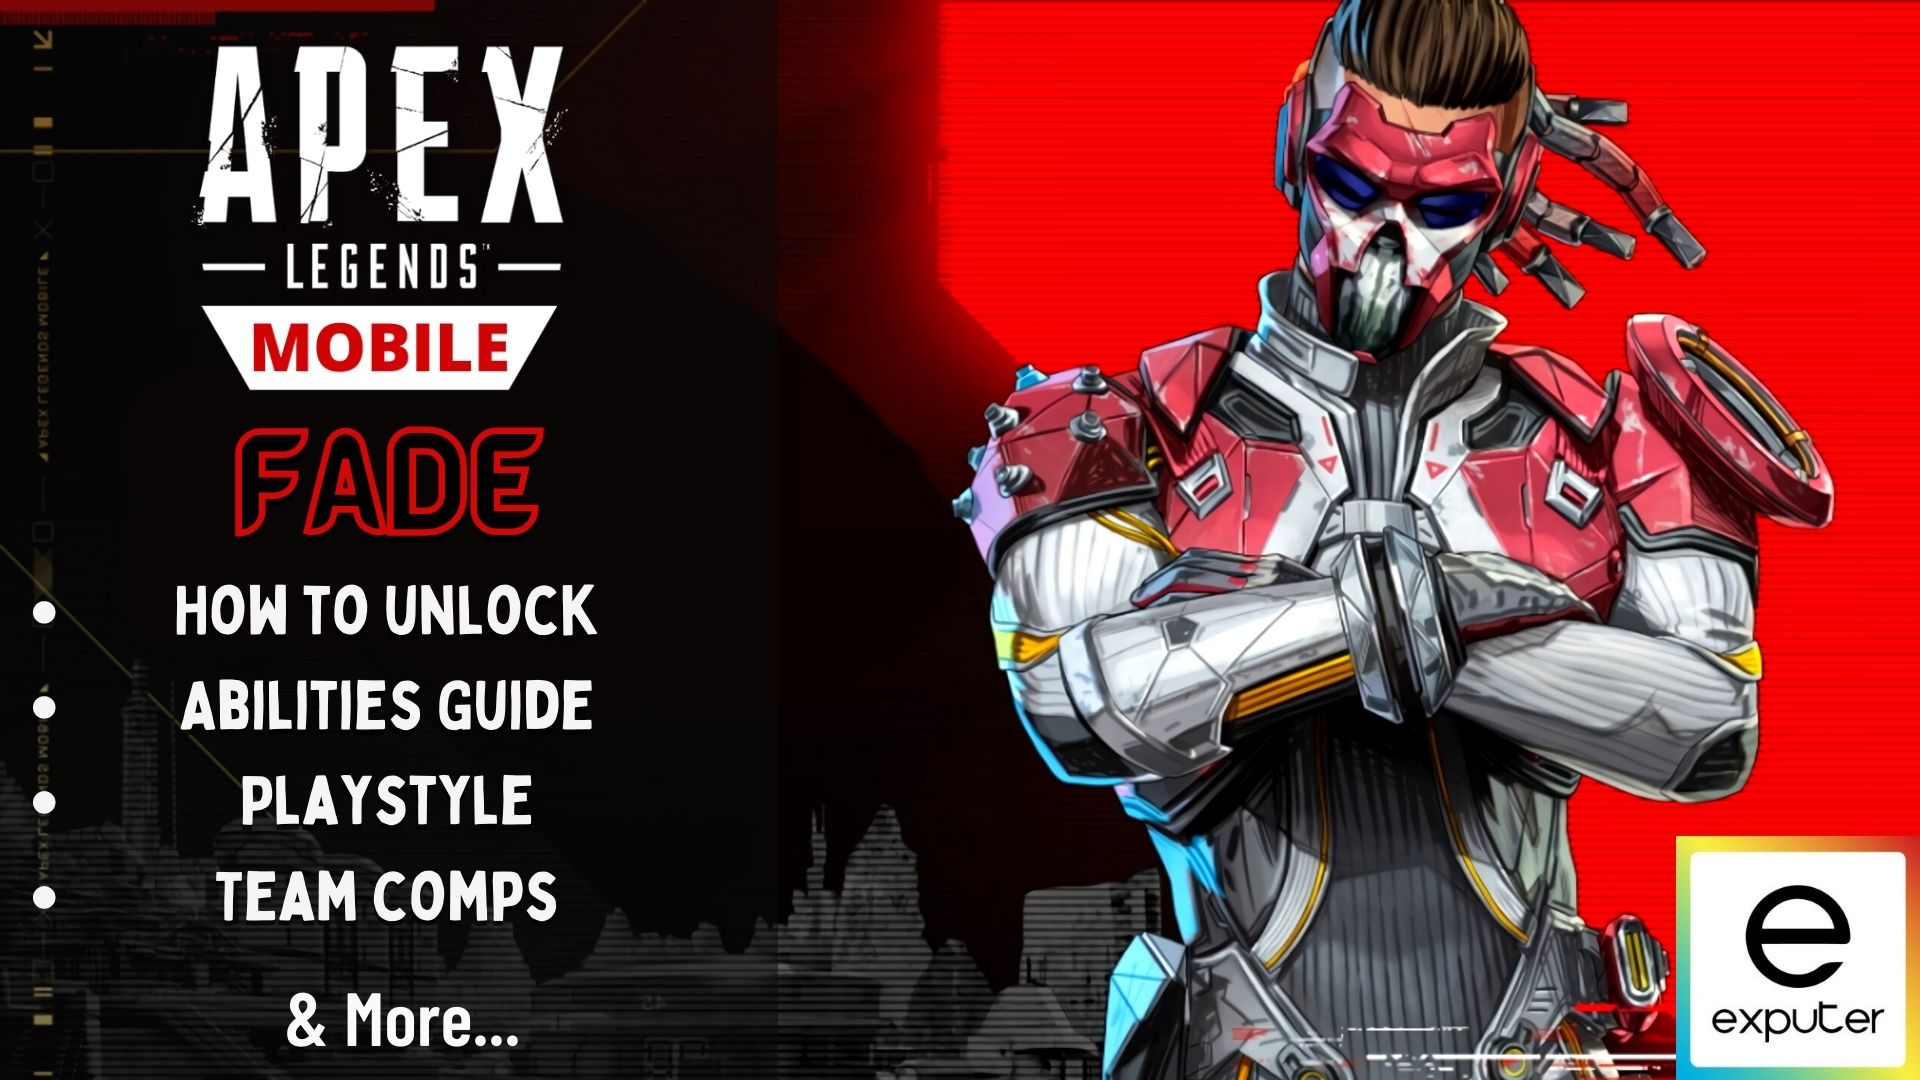 How to get Fade in Apex Legends Mobile, Fade abilities explained